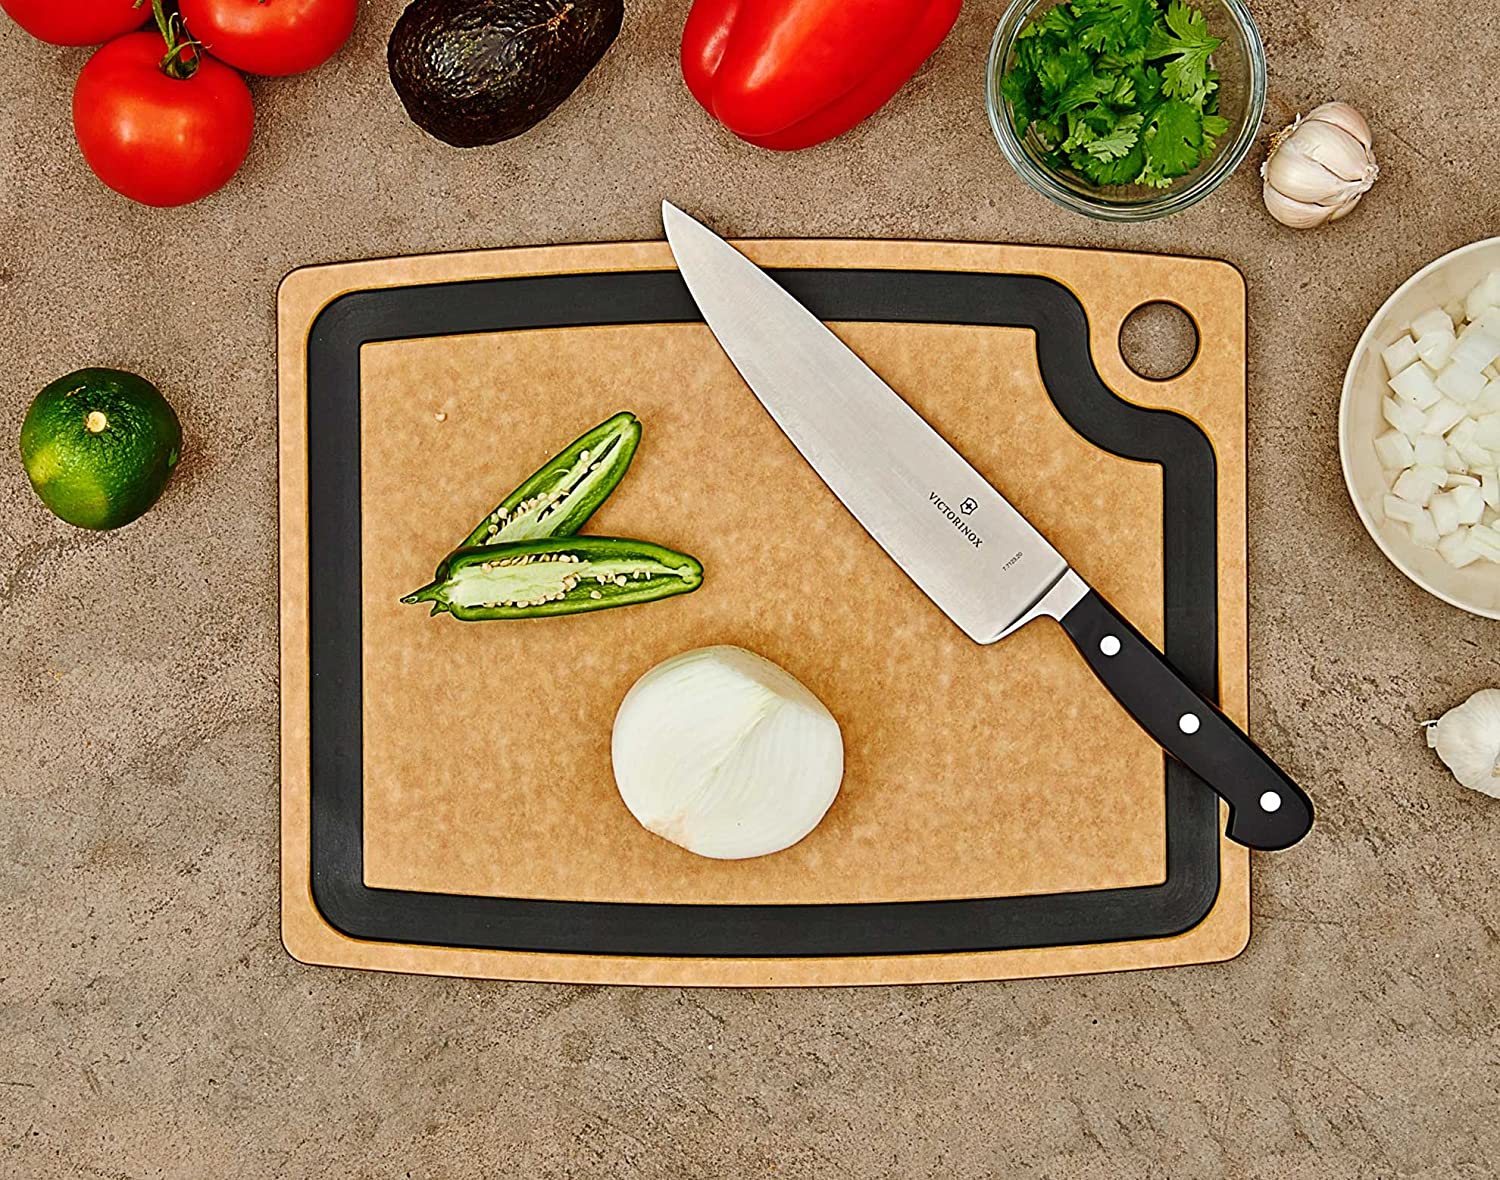 Fortune Candy Wood Fiber Cutting Board, 17.3 x 12.8 inch, Eco-Friendly, Knife-Friendly, Non-Slip Silicone Feet, Juice Groove, Dishwasher Safe,BPA-Free